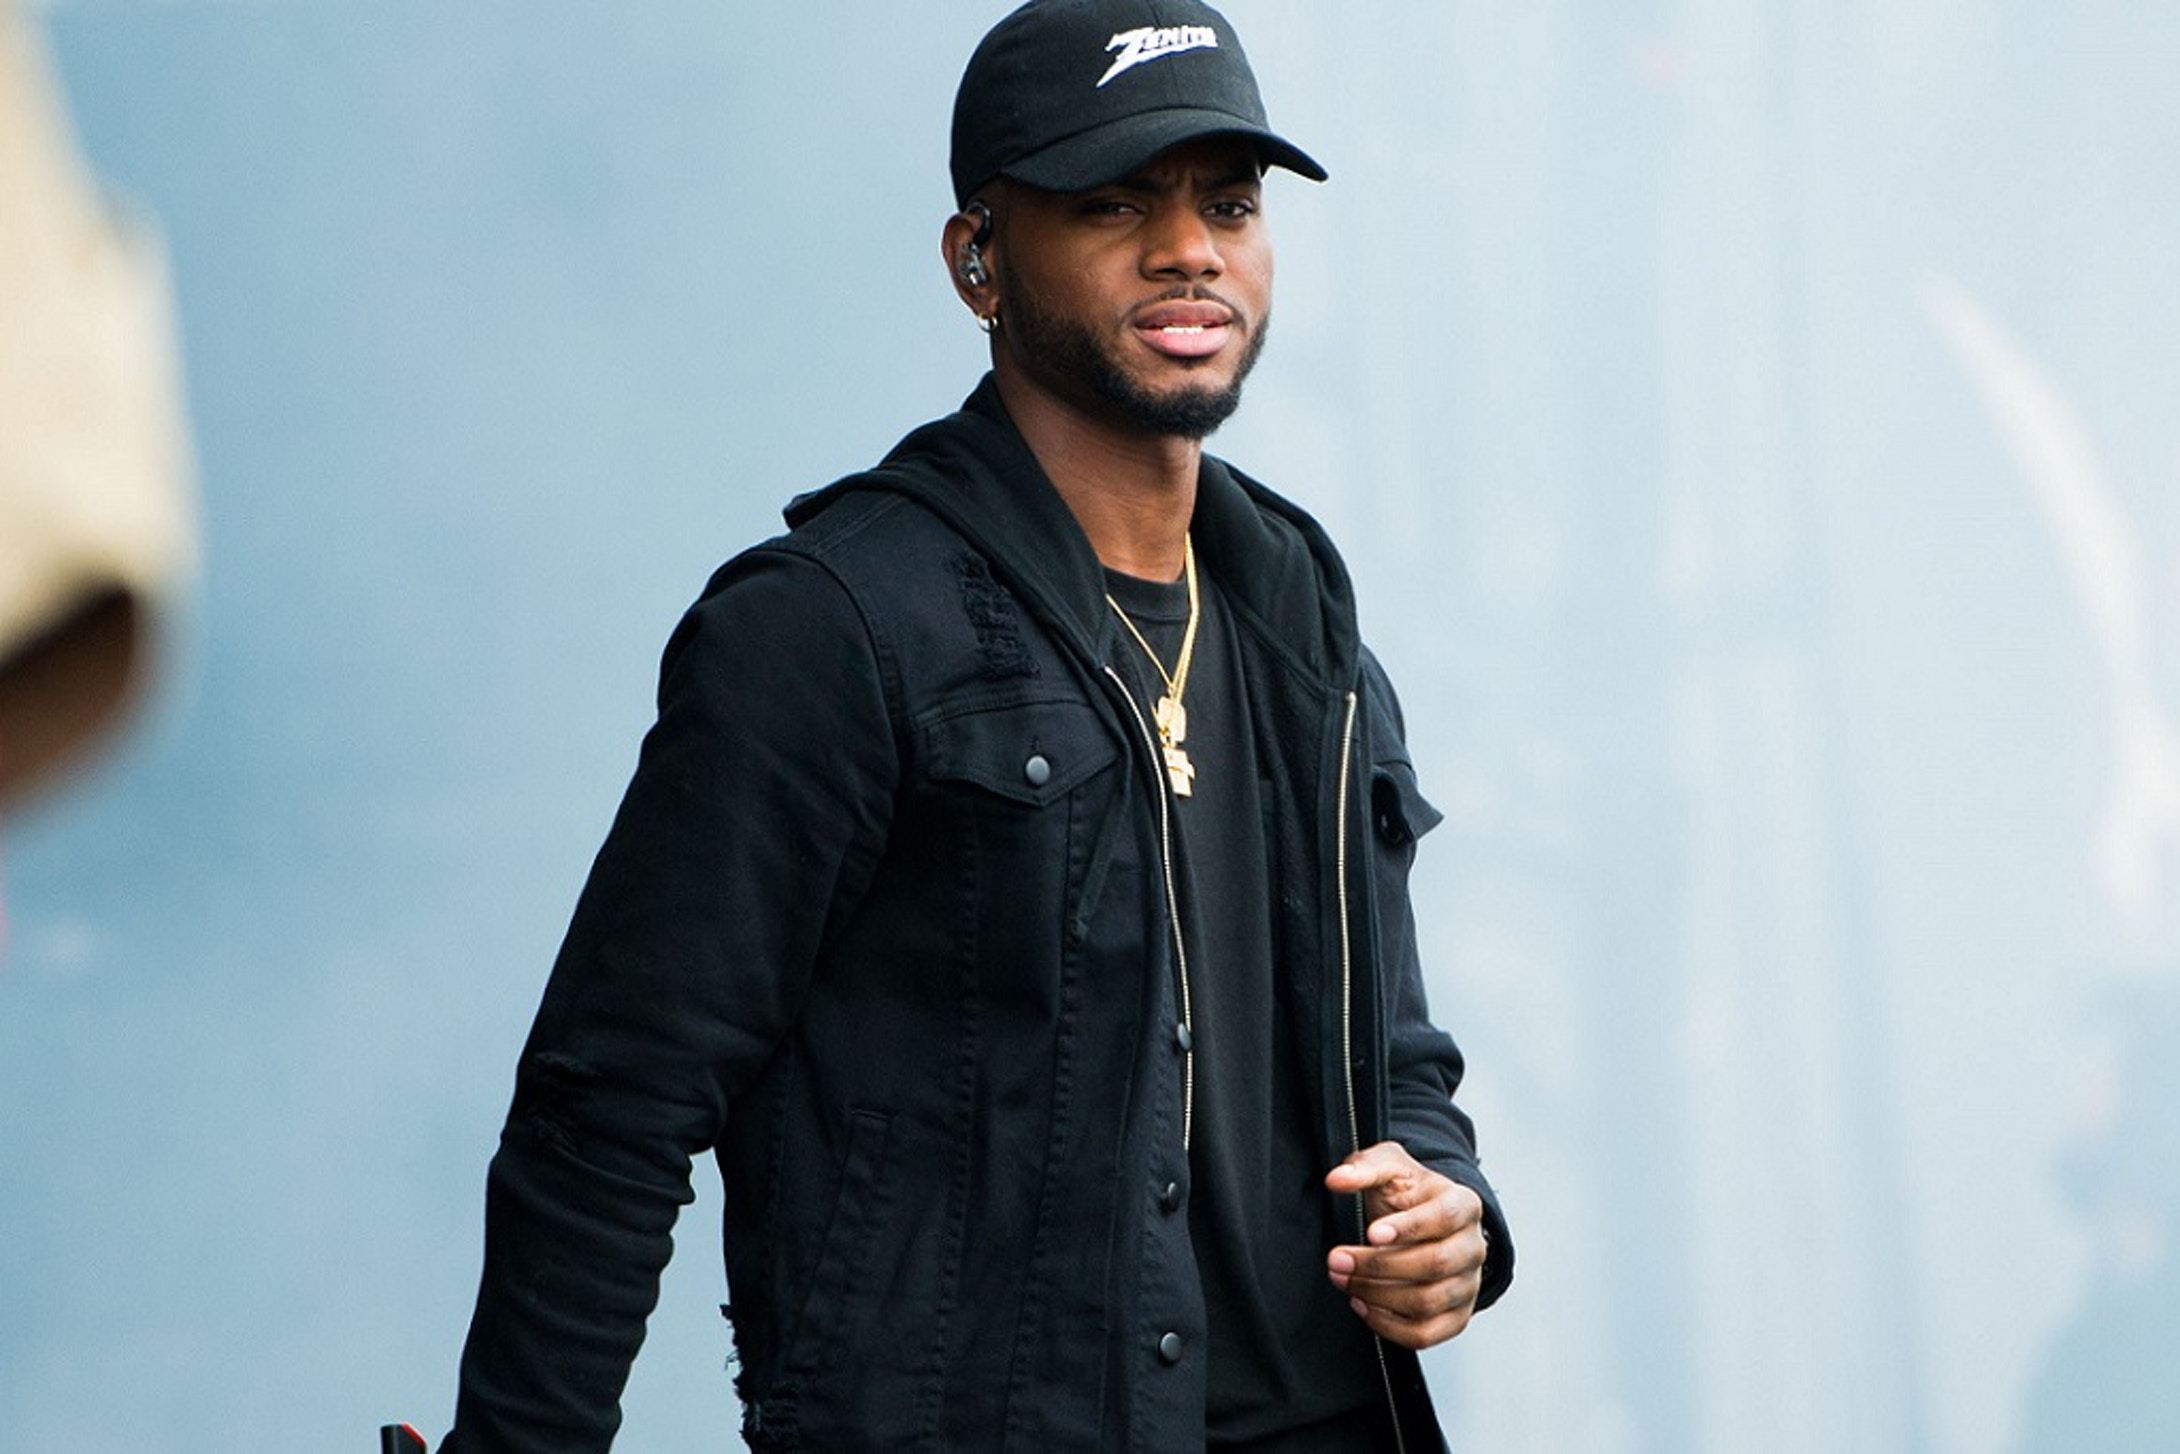 Bryson Tiller Celebrates Graduating High School and Announces Plans to Attend College